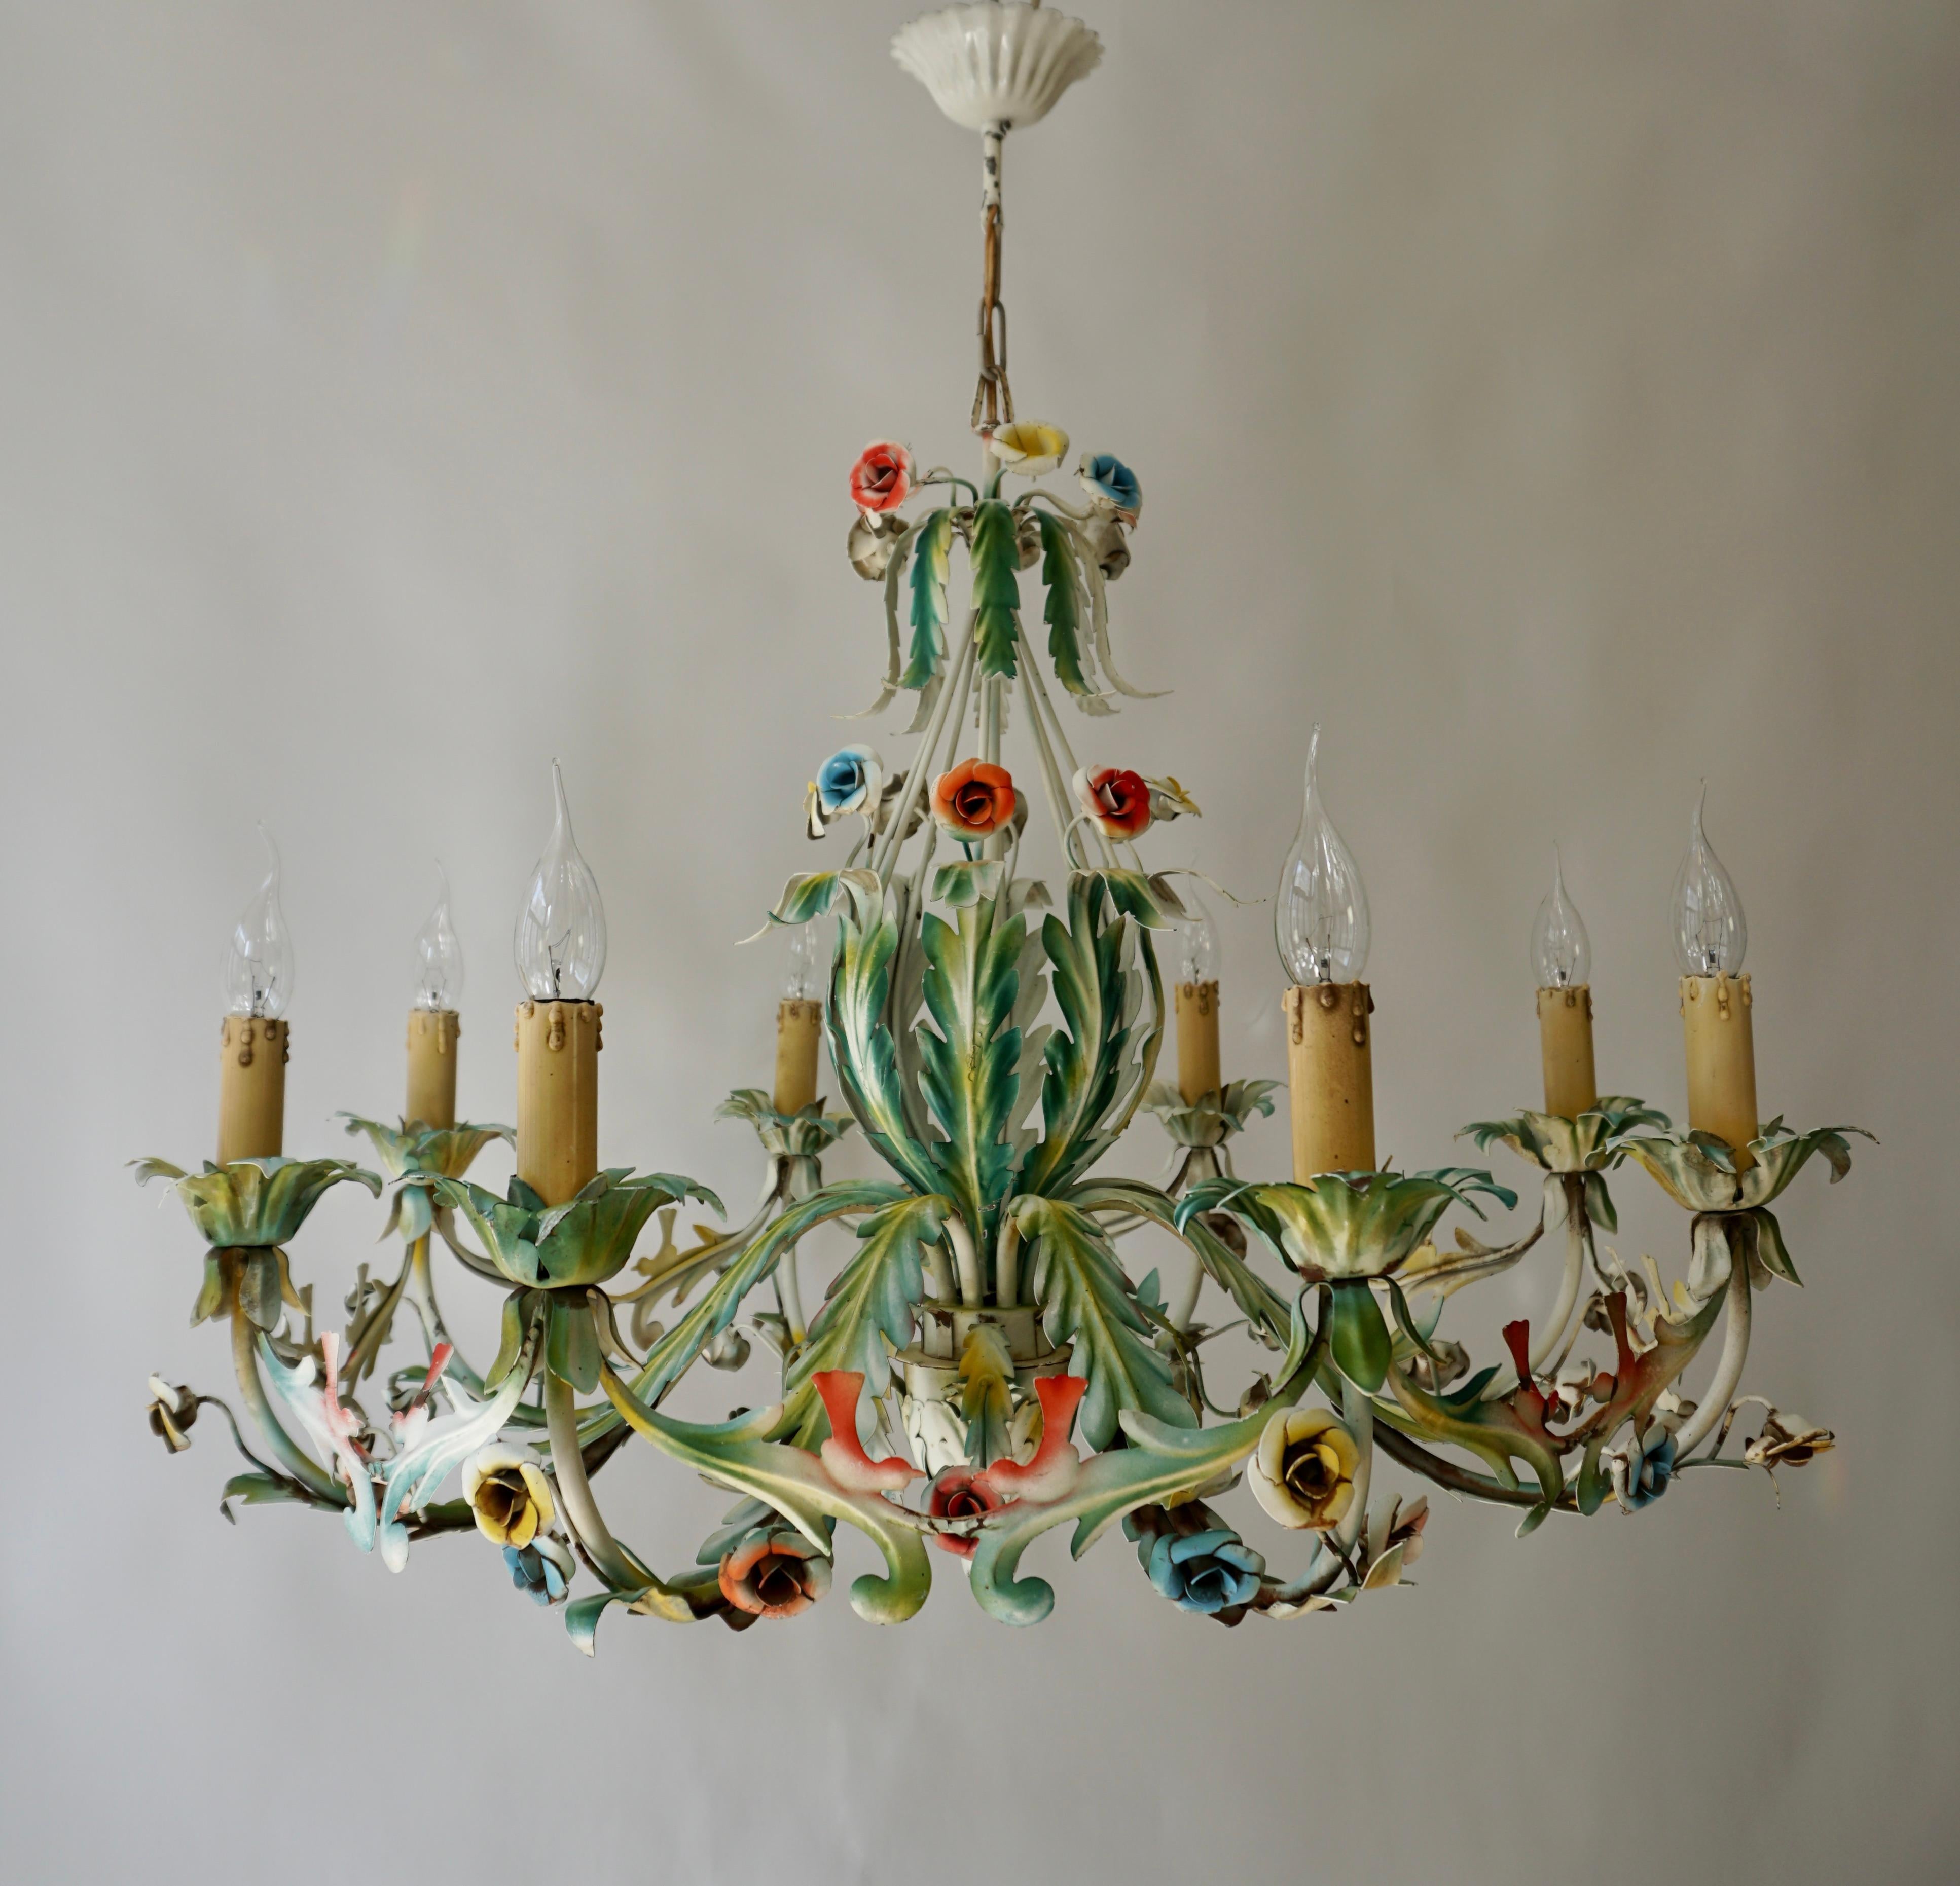 Large Polychrome painted metal eight-light chandelier decorated with flowers and birds, Italy, circa the 1970s. 

A beautiful Italian ceiling light made of metal with flowers and leaves painted in pastel pink, blue, green, and yellow colors. Eight